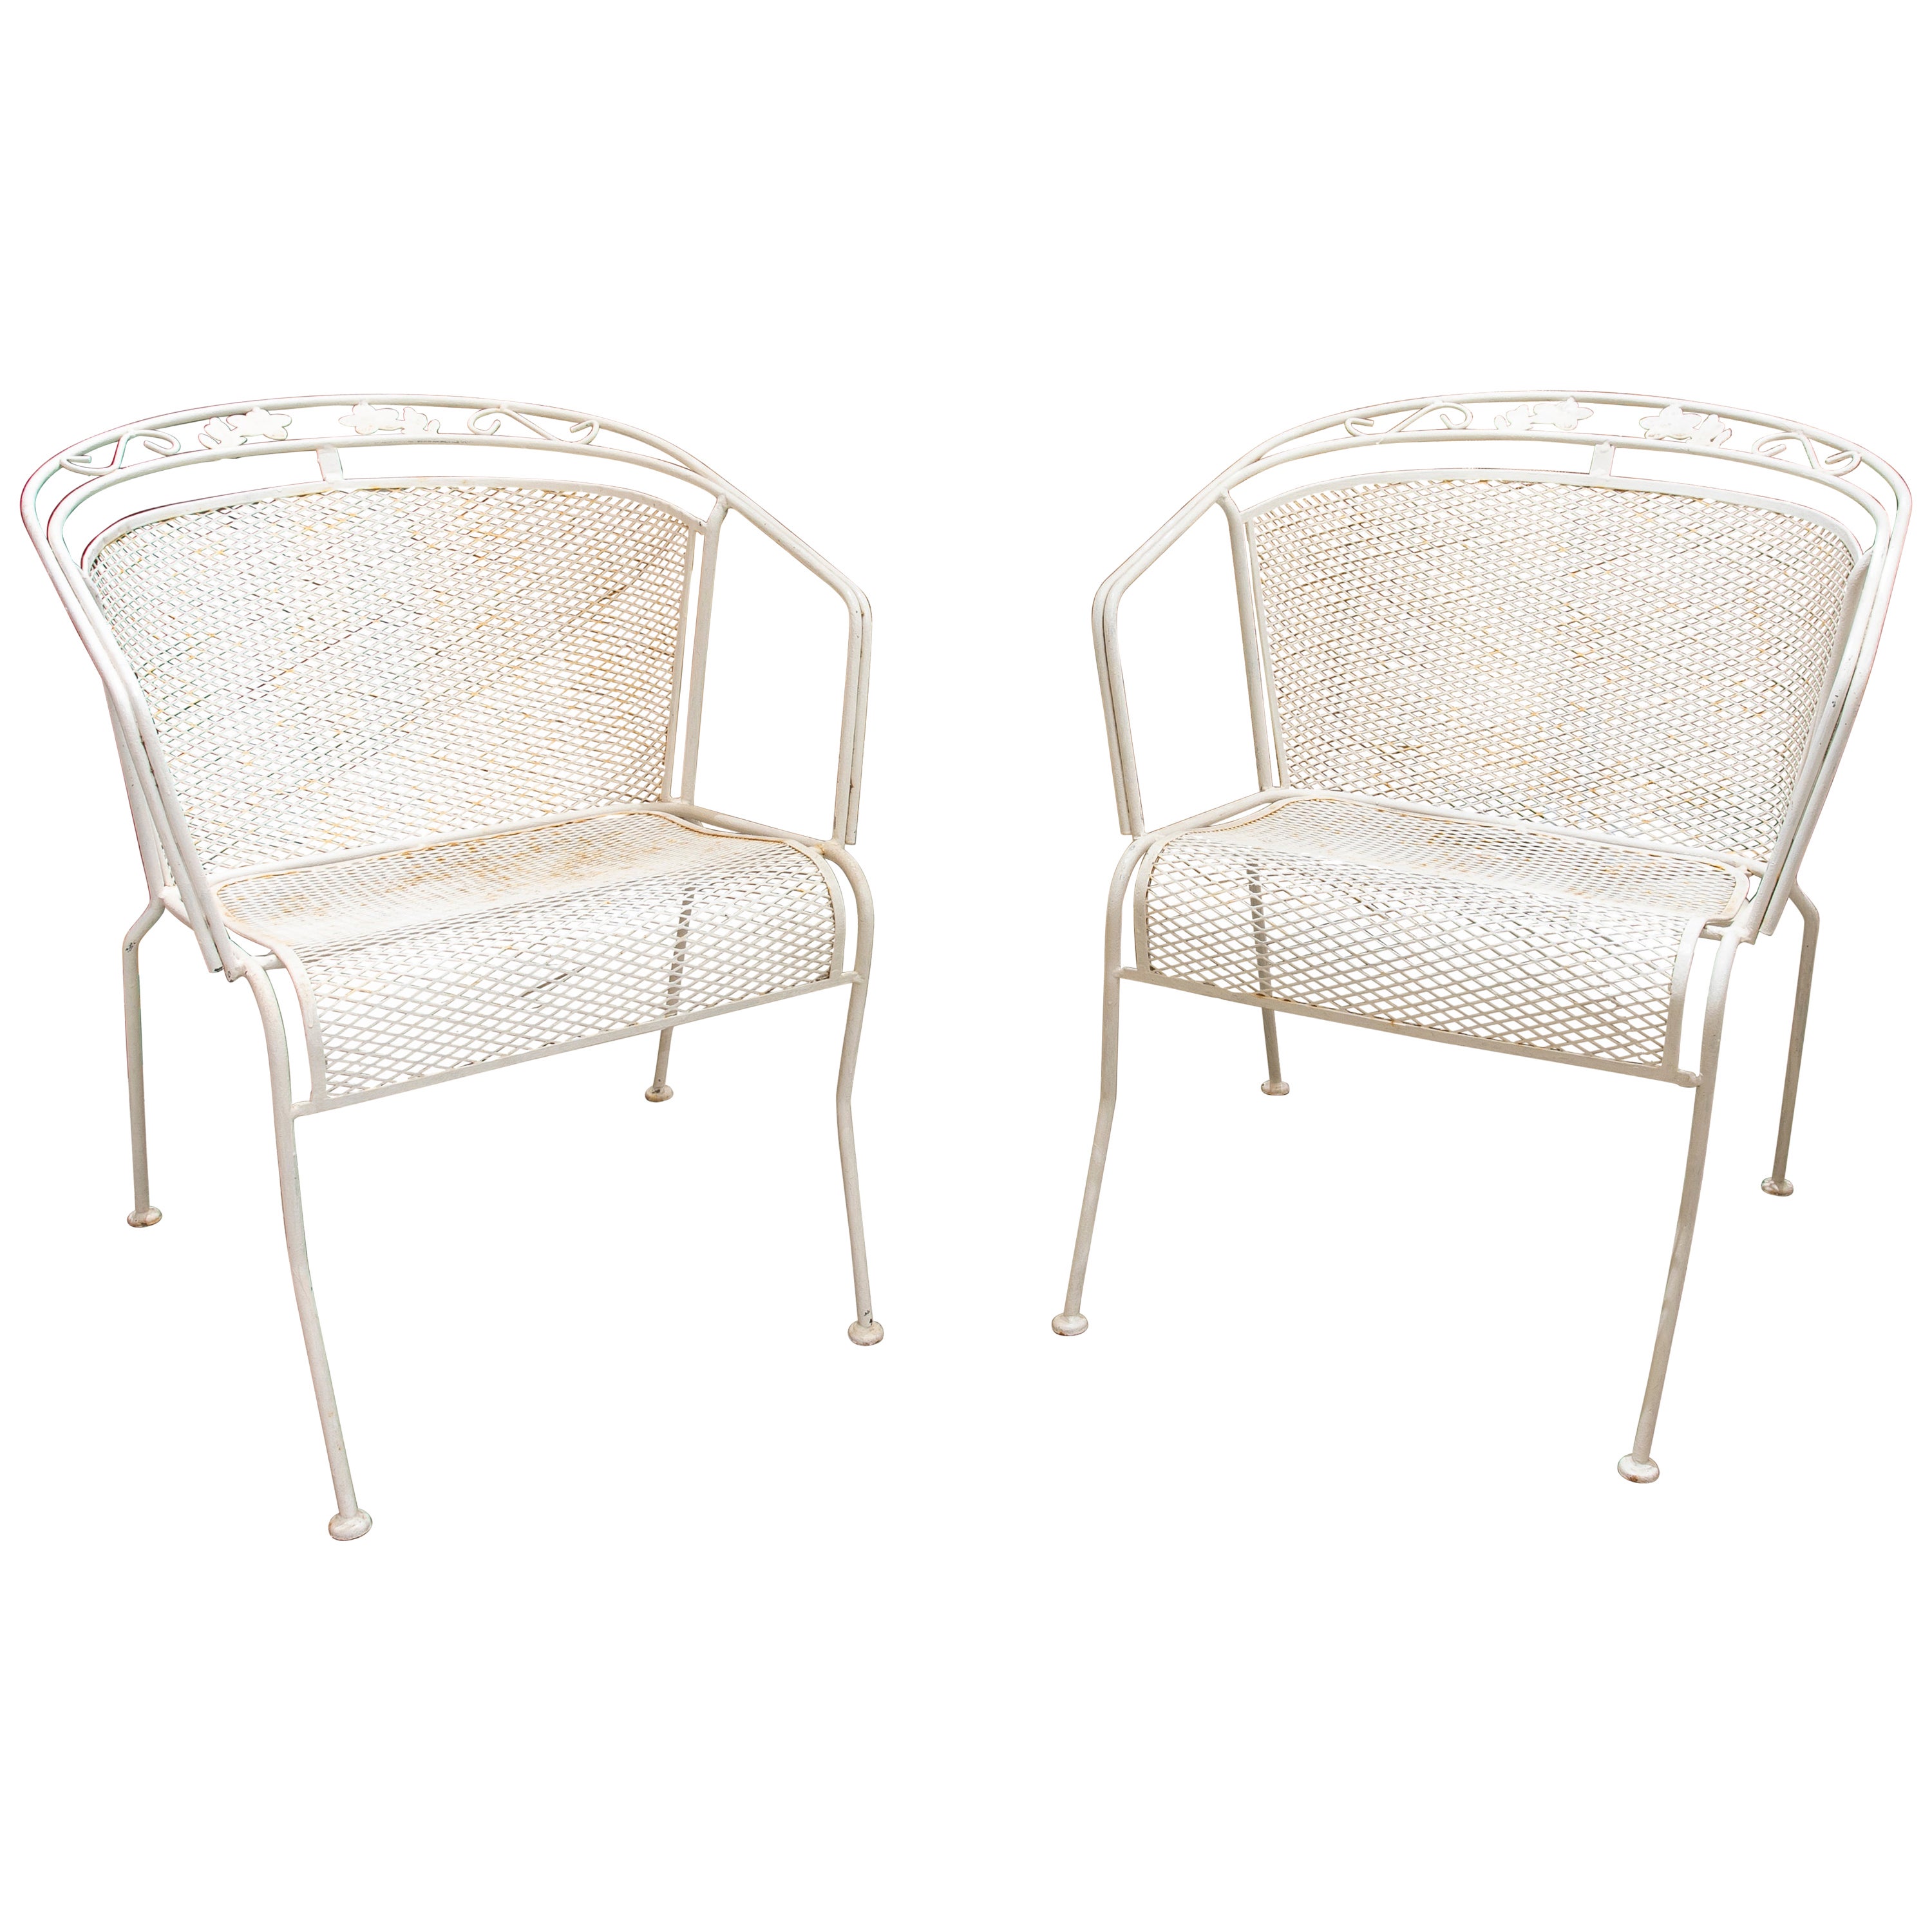 1970s Spanish Pair of Iron Garden Chairs in White Color For Sale